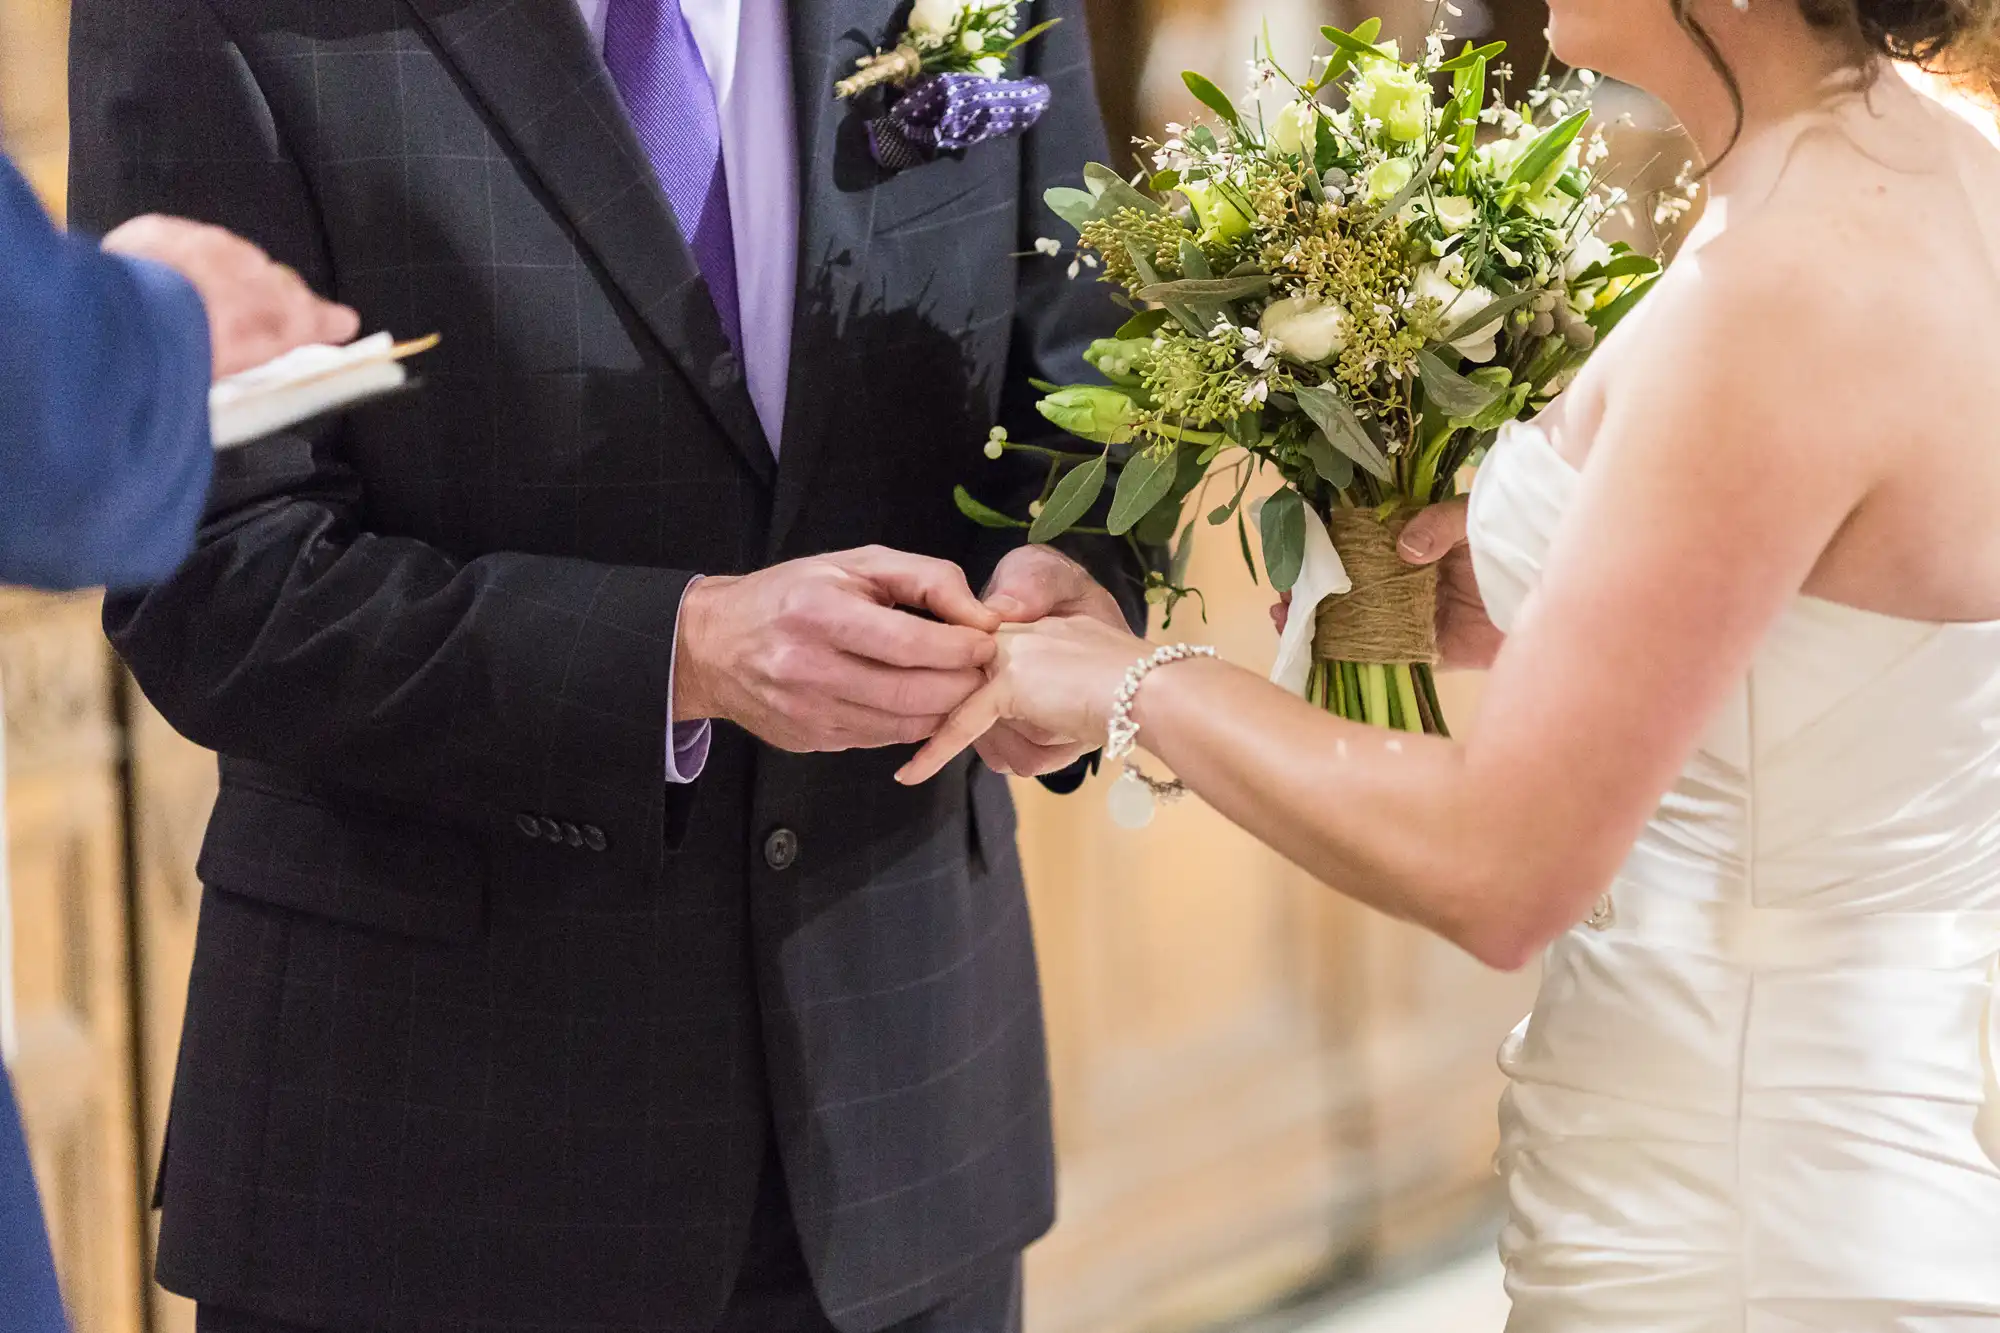 A bride and groom exchanging rings during a wedding ceremony, with the bride holding a bouquet of white and green flowers.